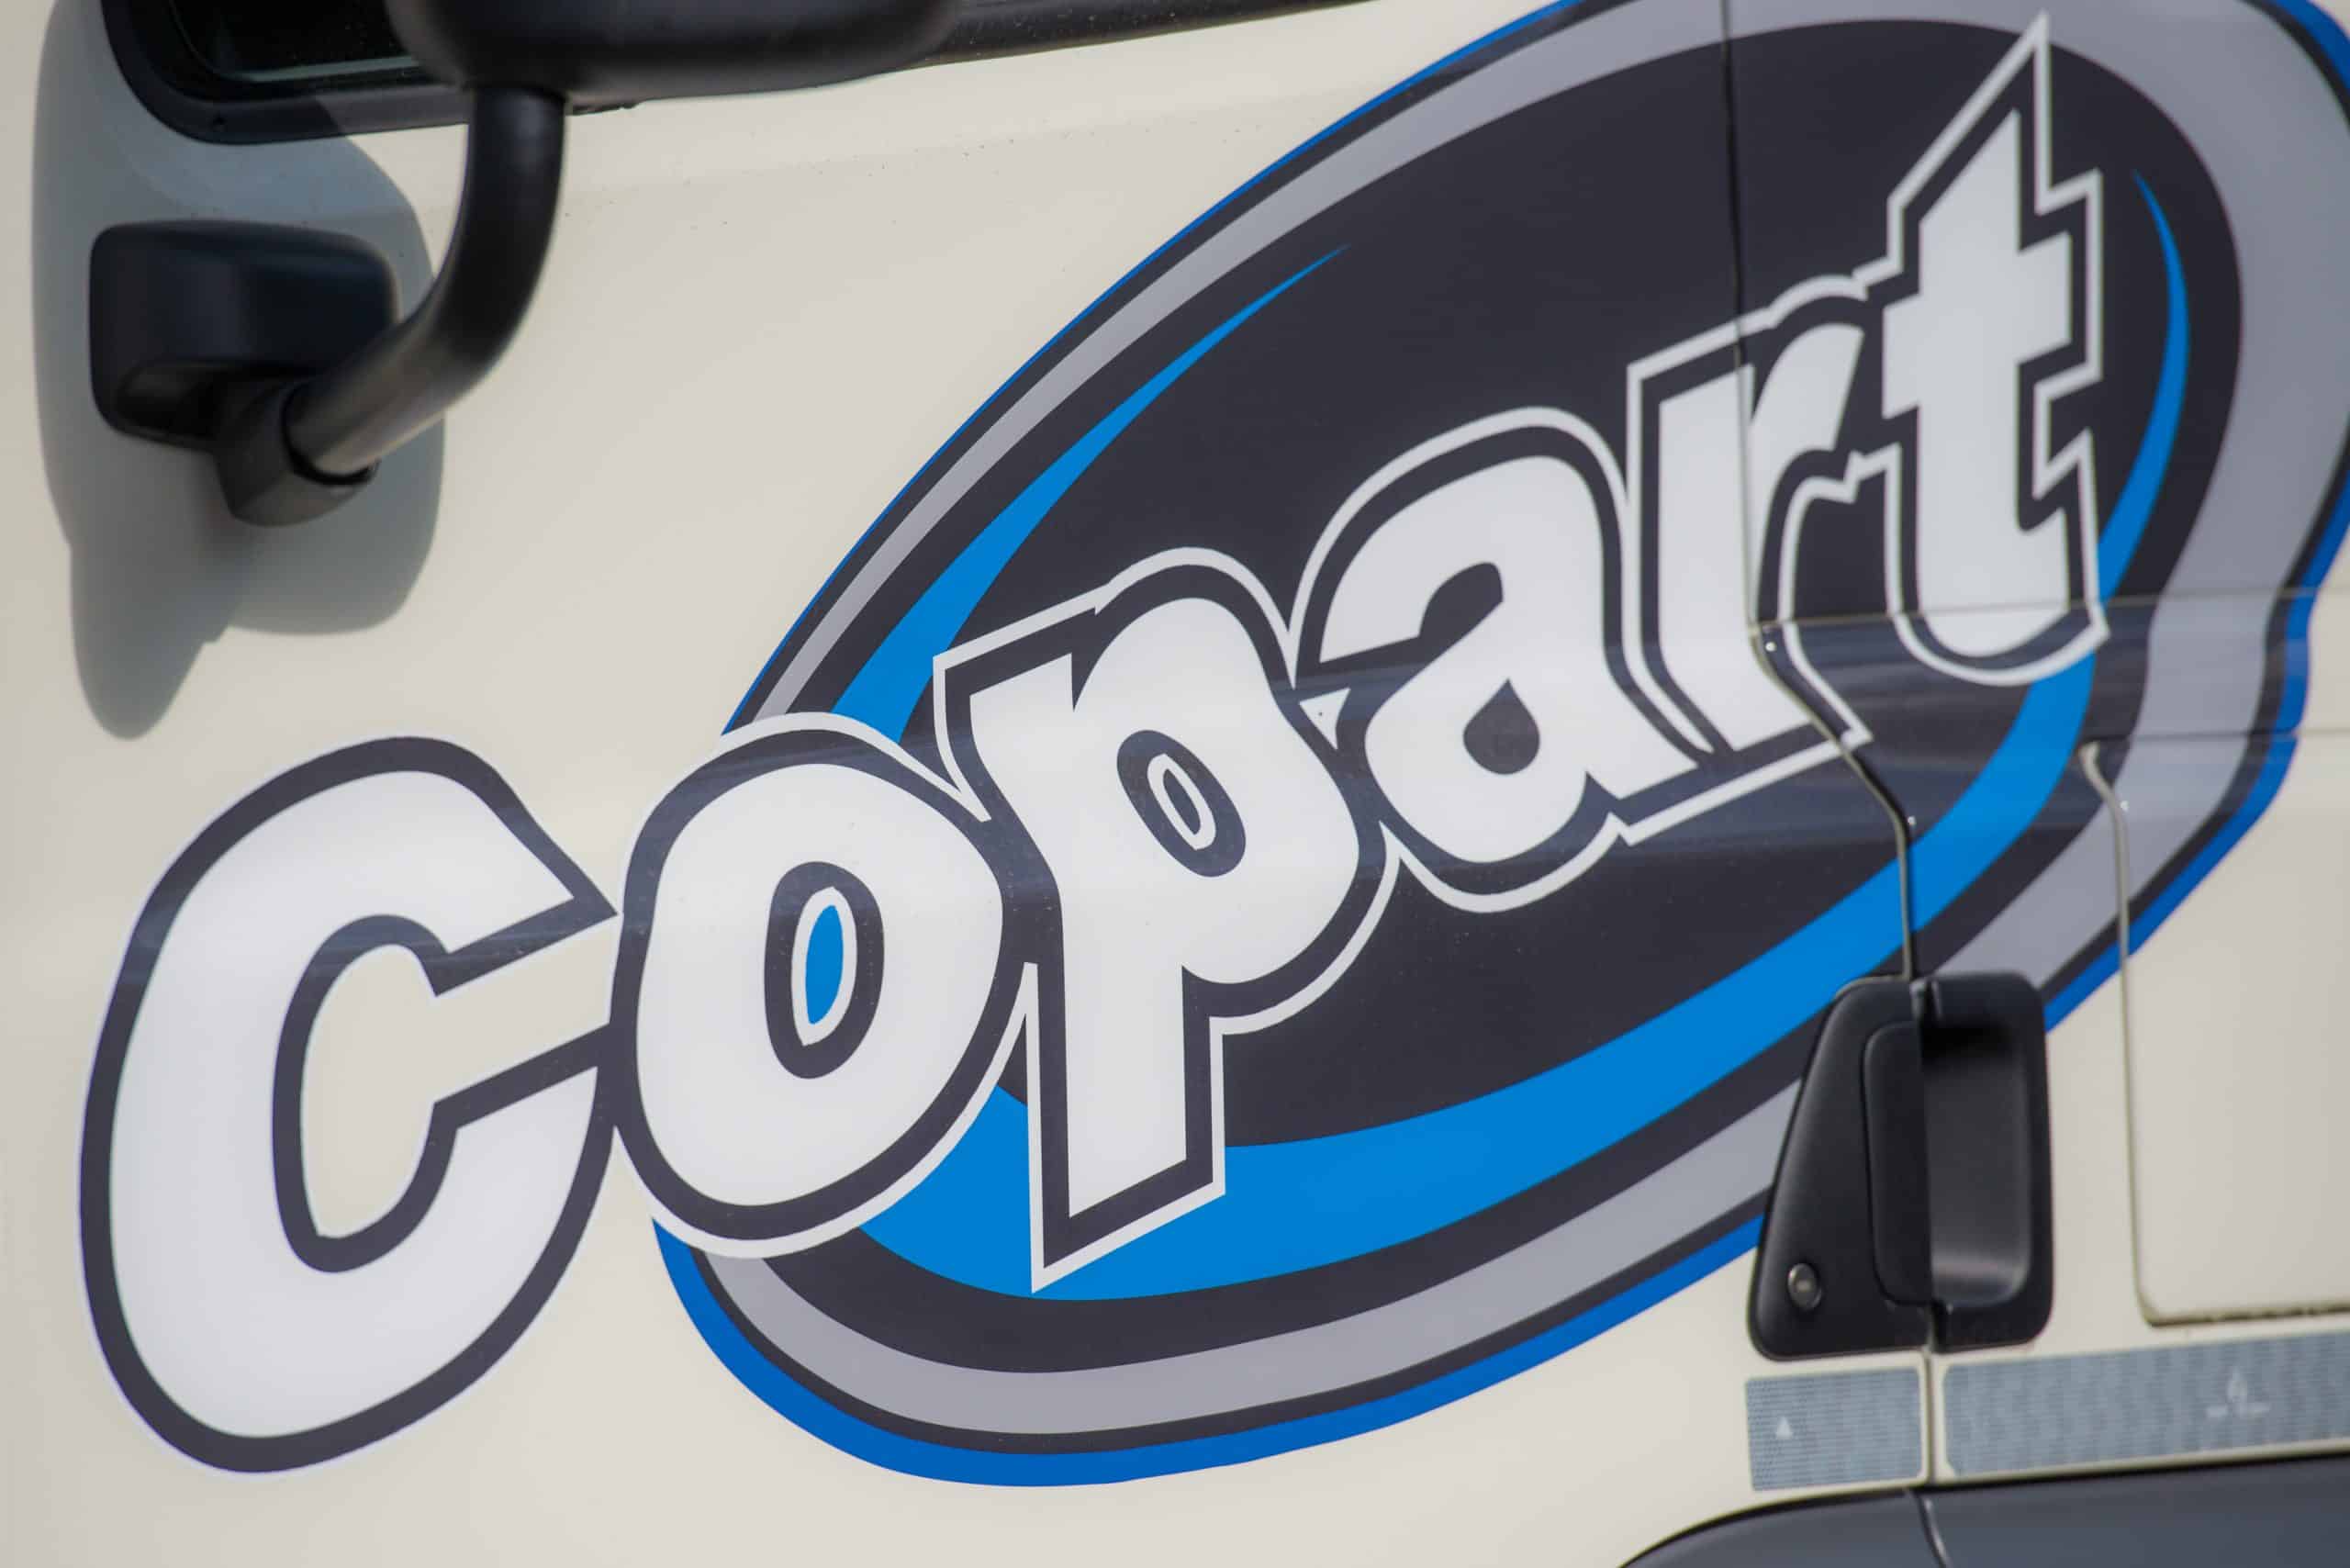 Update on Copart and our approach to Covid19 Online Vehicle Auctions